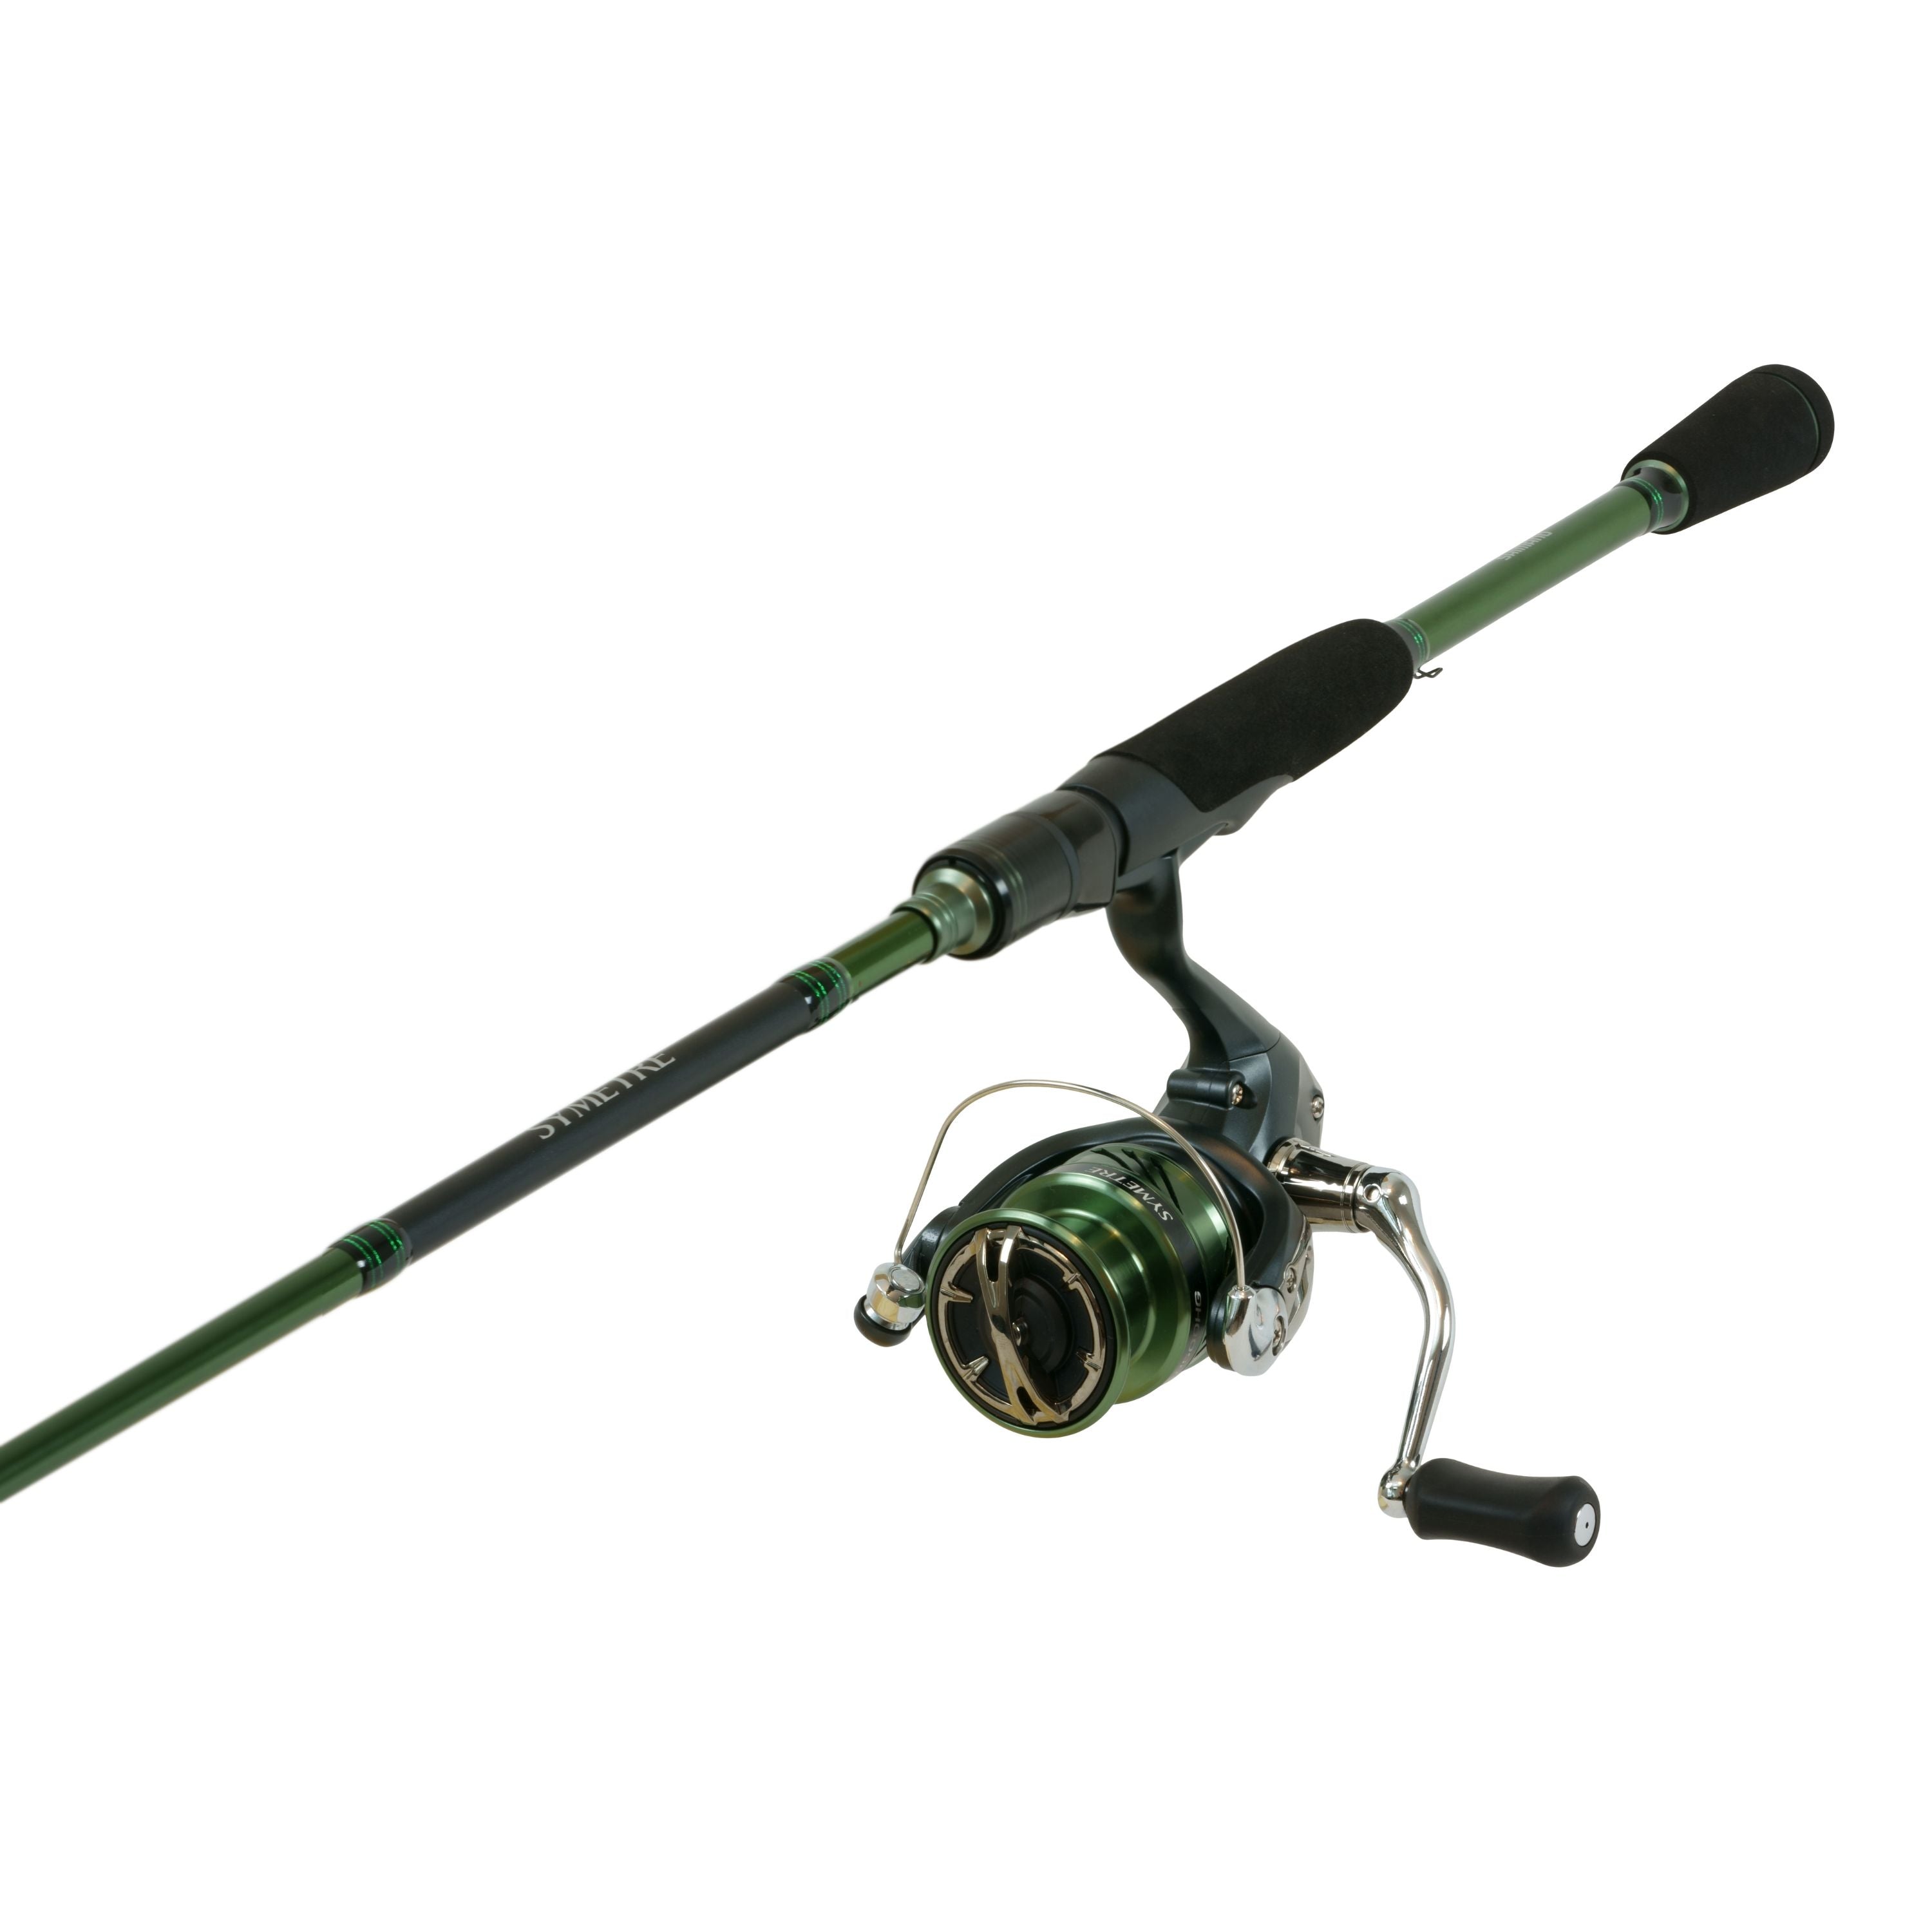 "Symetre" Spinning combo 2500 reel